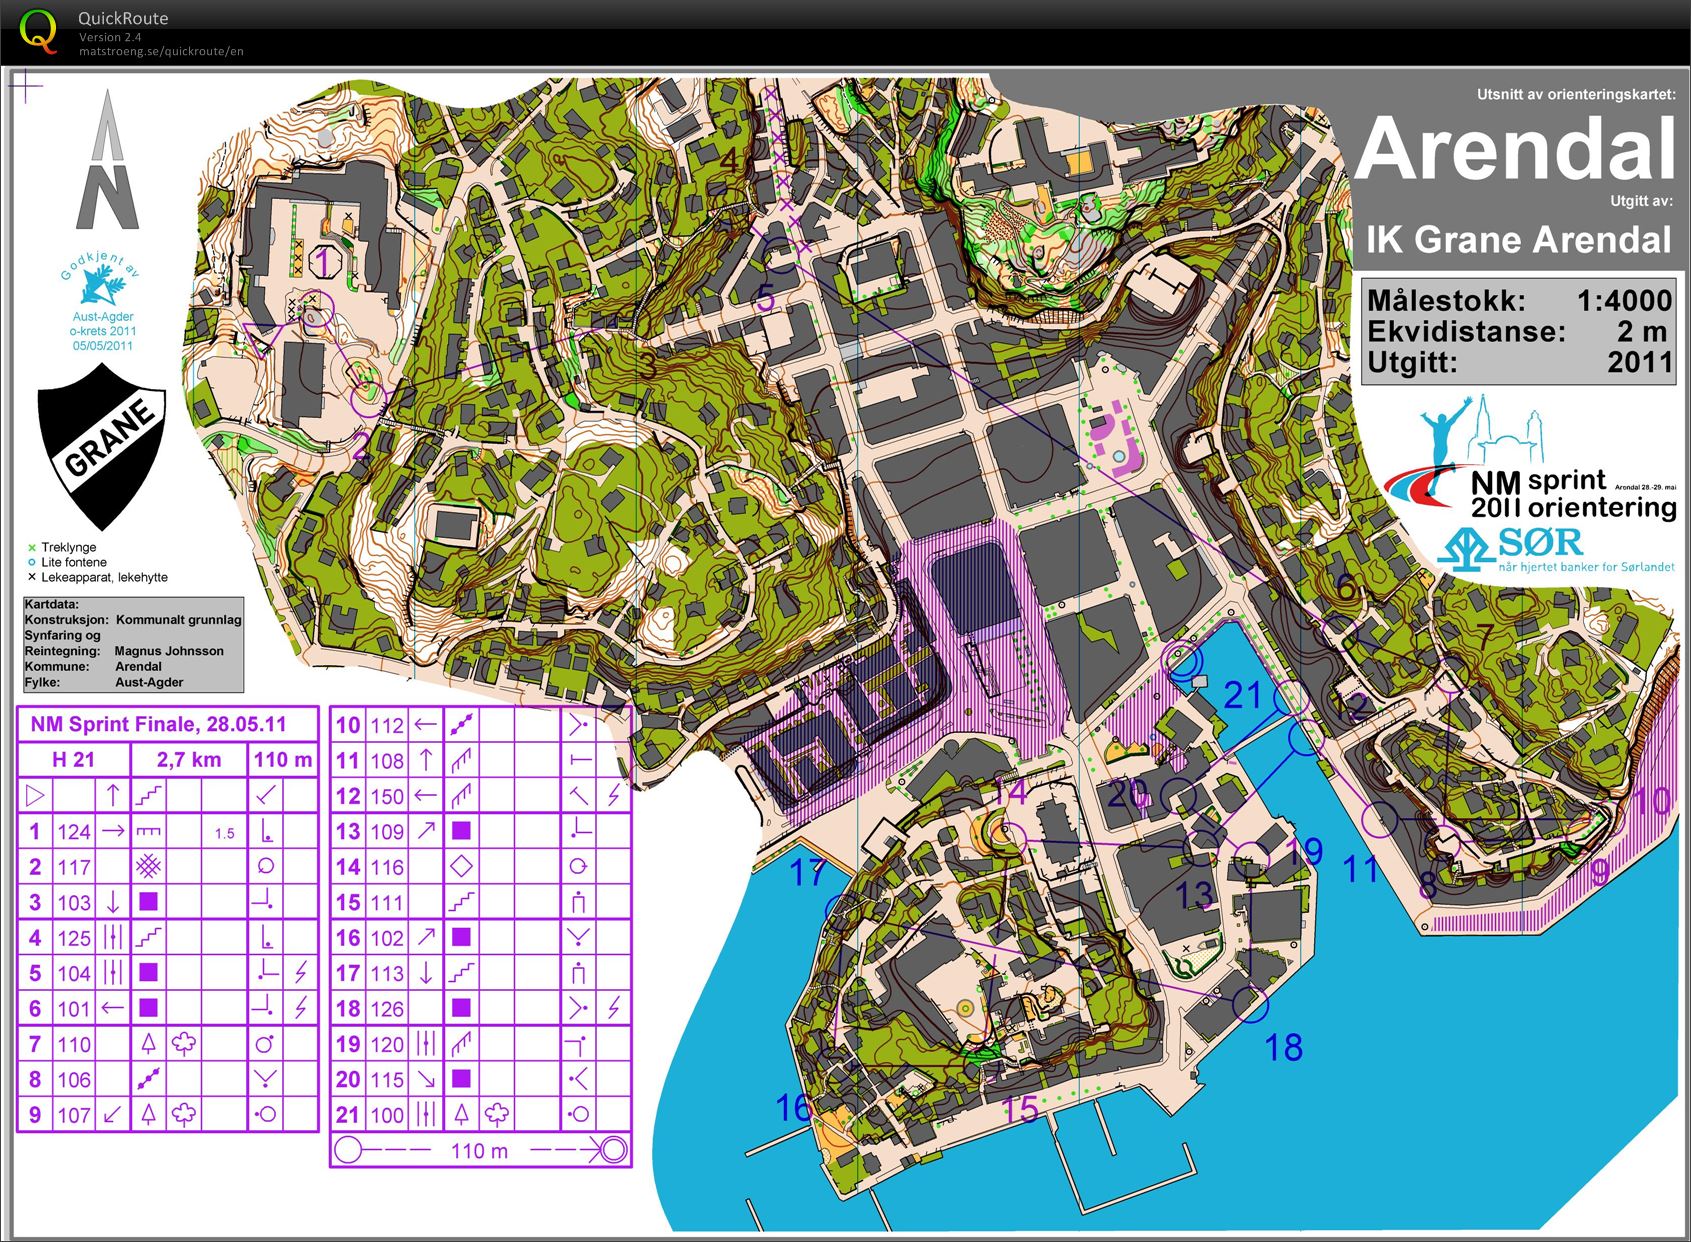 NM Sprint Arendal H21 course (2013-07-09)